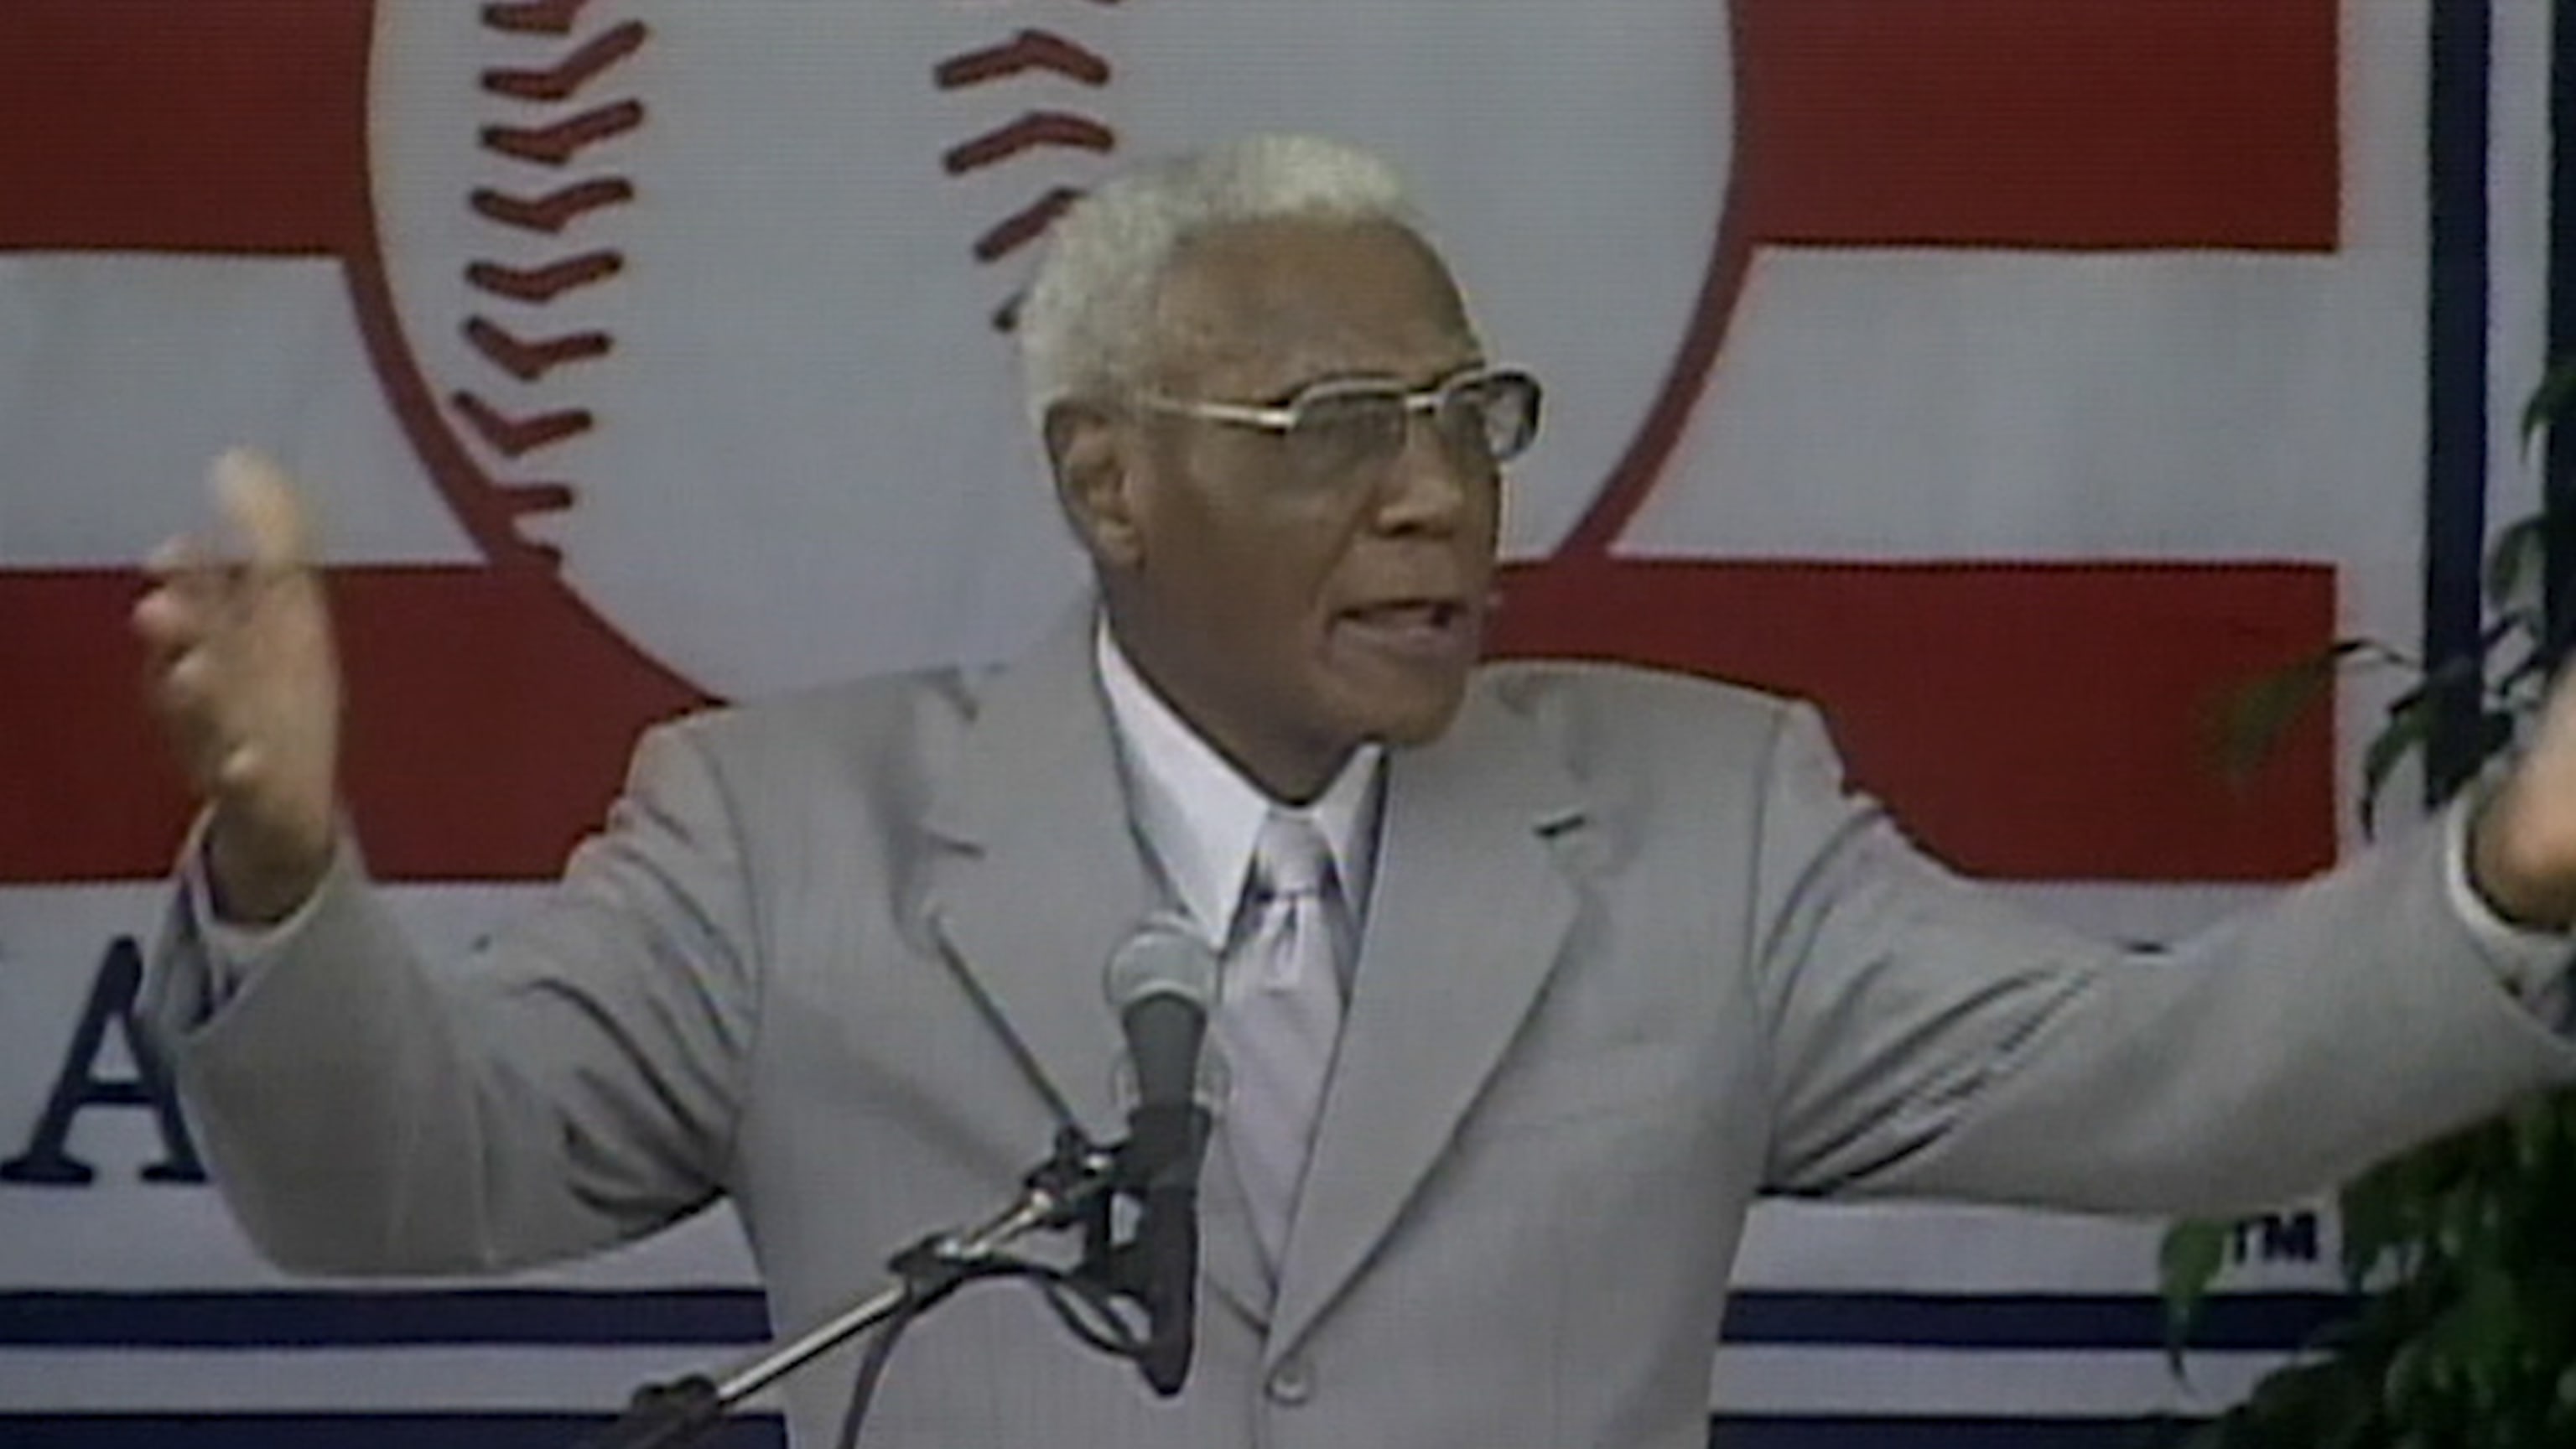 MLB's 1st Black manager, Buck O'Neil, inducted into Hall of Fame